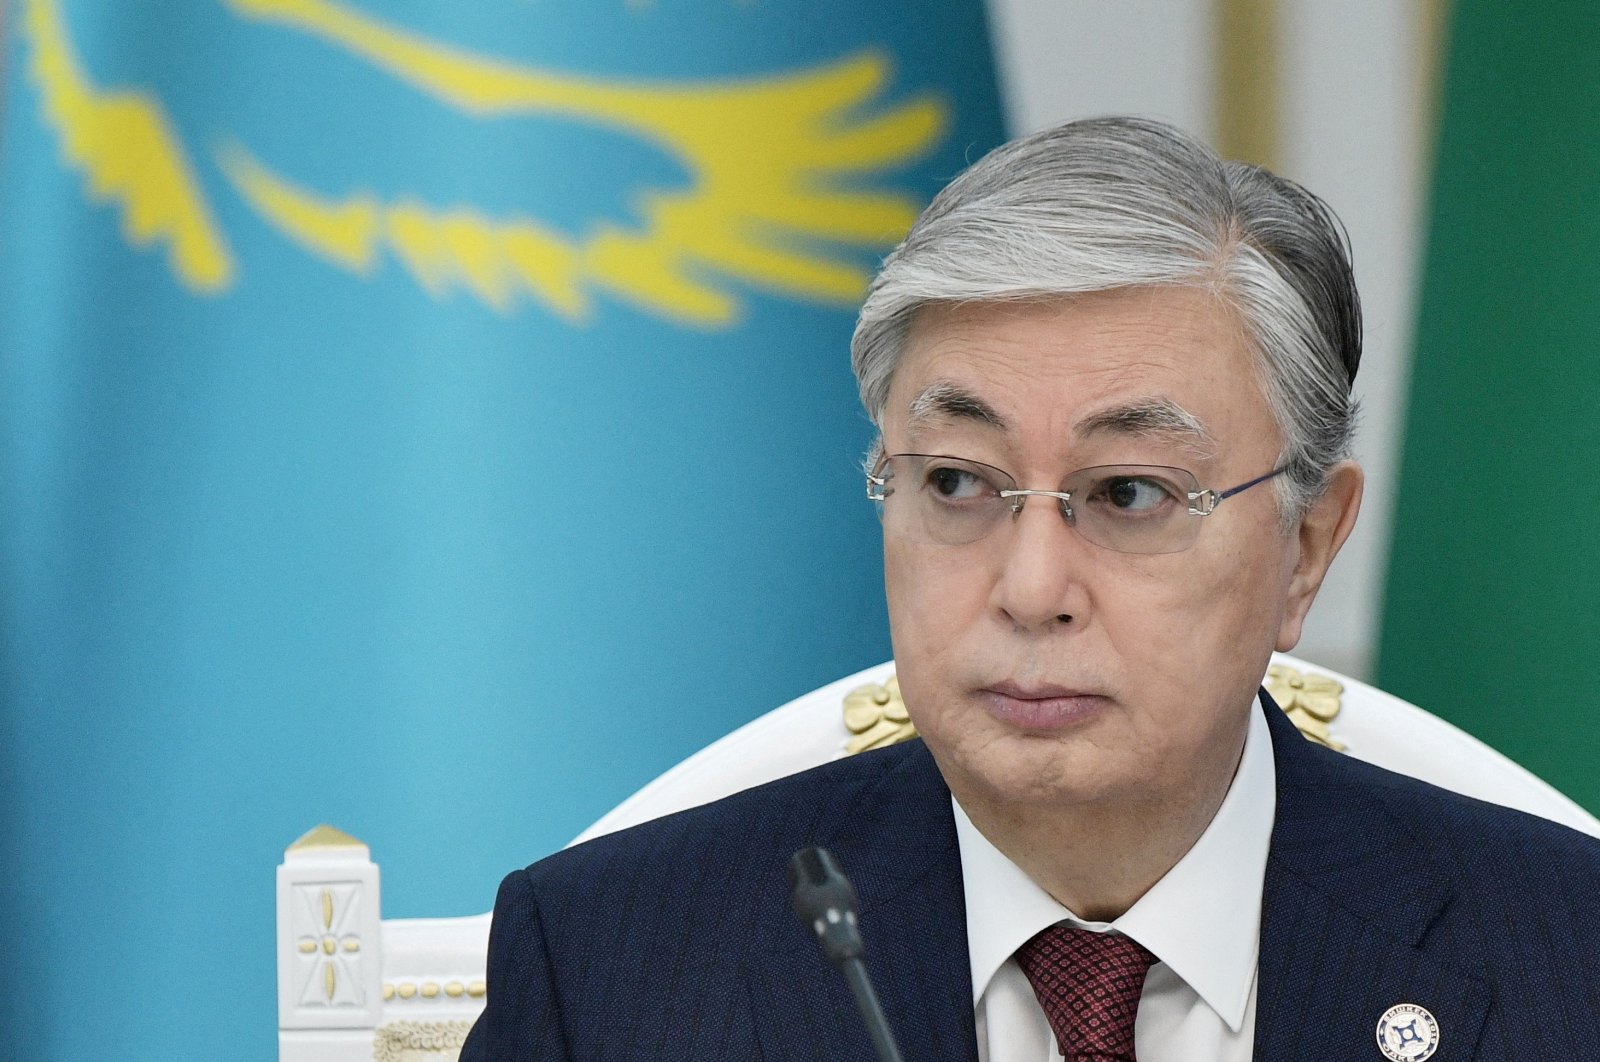 Constitutional order mostly restored: Kazakhstan's Tokayev says